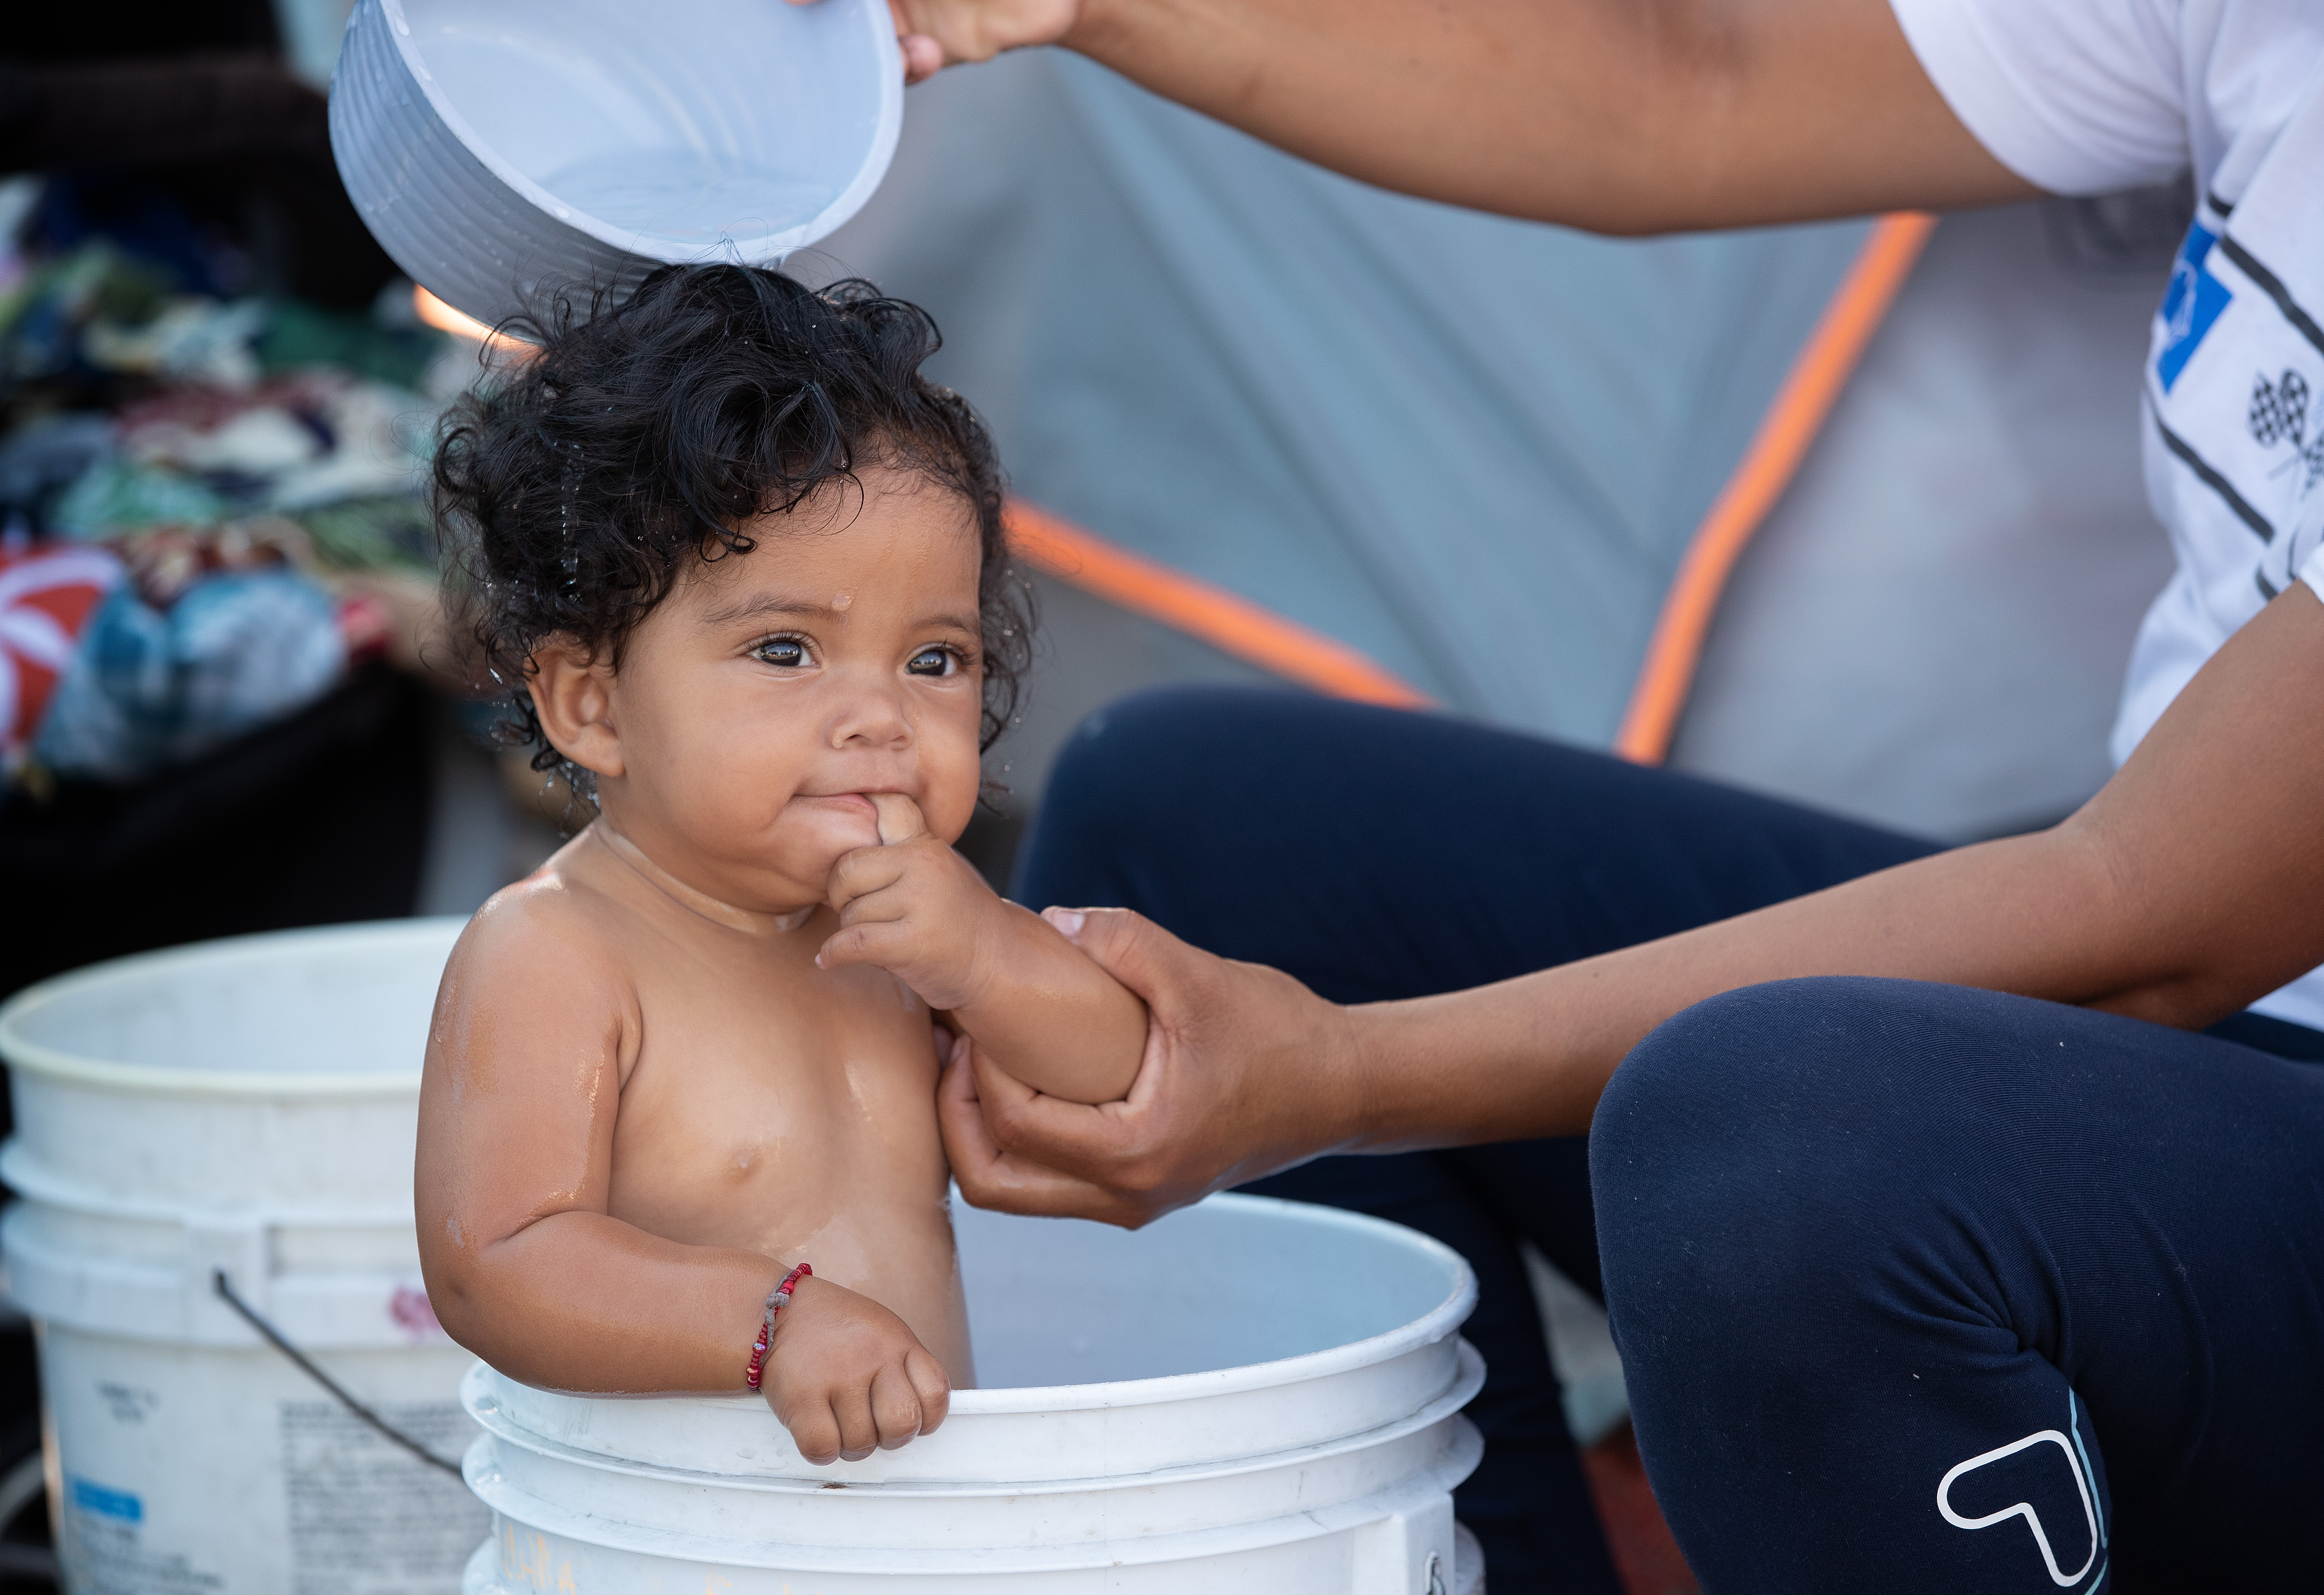 Eight-month-old Kelani, whose mother fled gang violence in Honduras, bathes in a plastic bucket at a makeshift migrant camp at El Chaparral border crossing in Tijuana, Mexico. Photo by Mike DuBose, UM News.